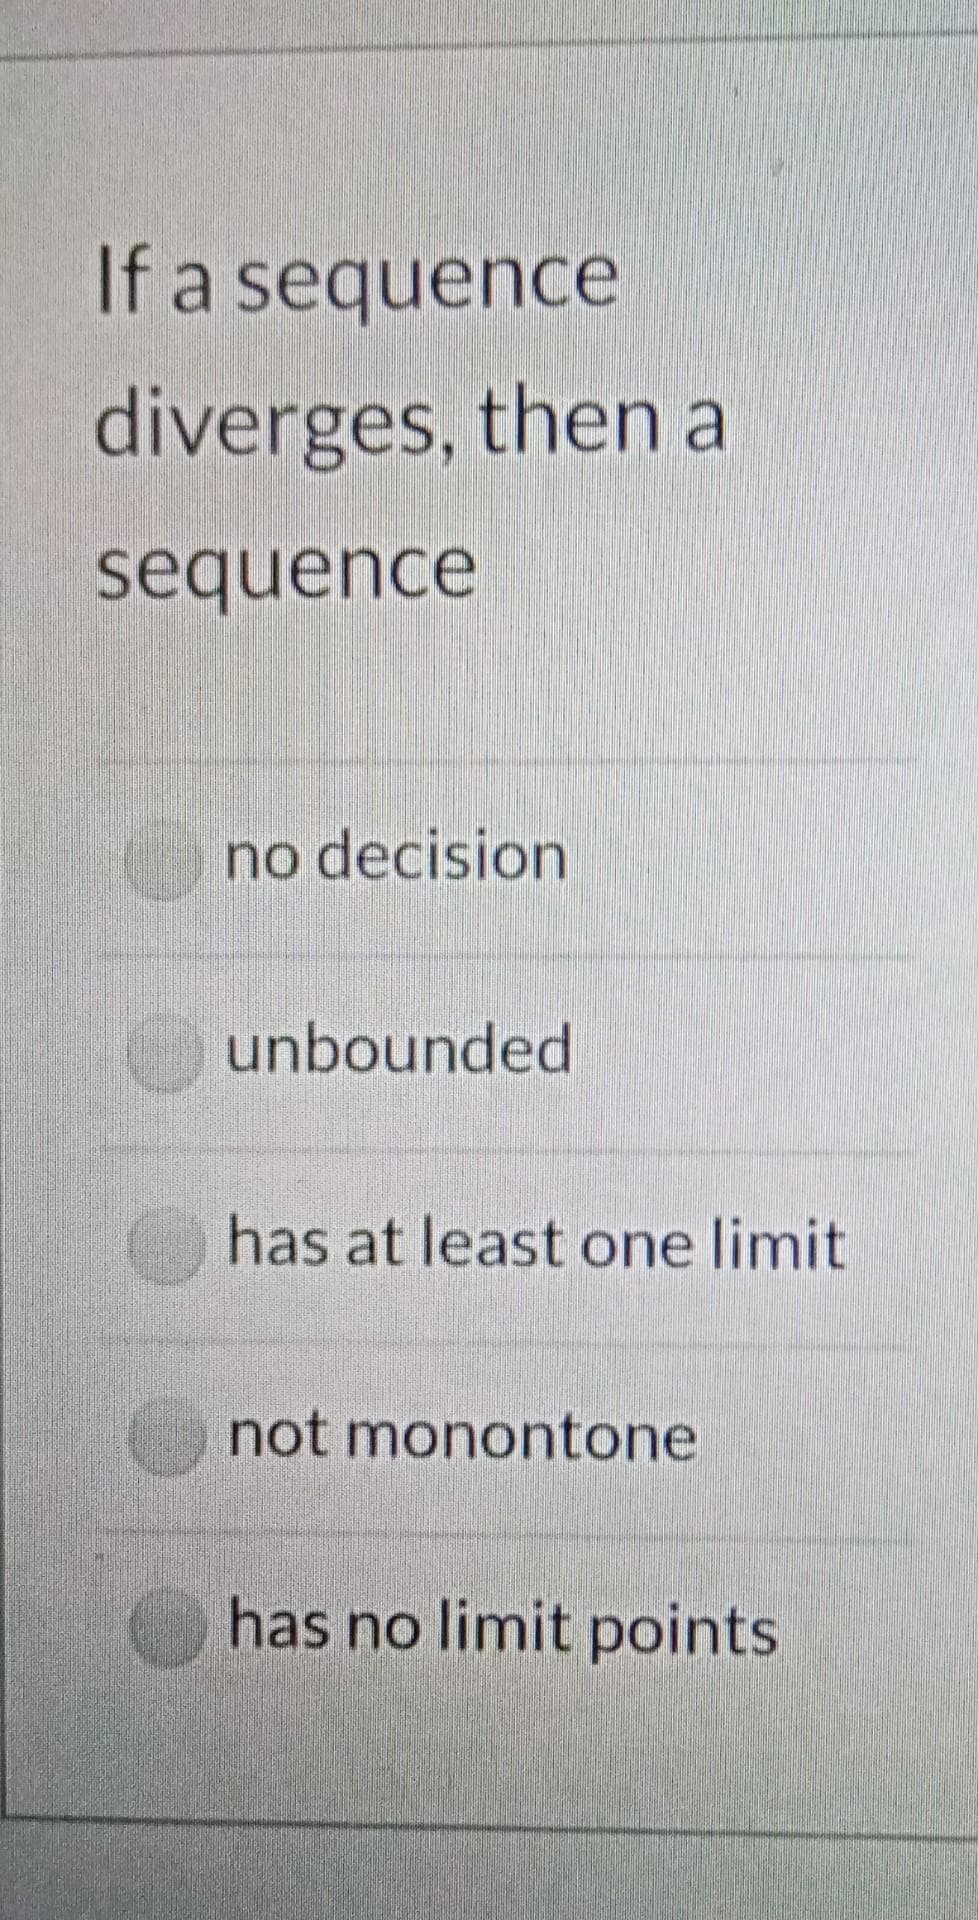 If a sequence
diverges, then a
sequence
no decision
unbounded
has at least one limit
not monontone
has no limit points
